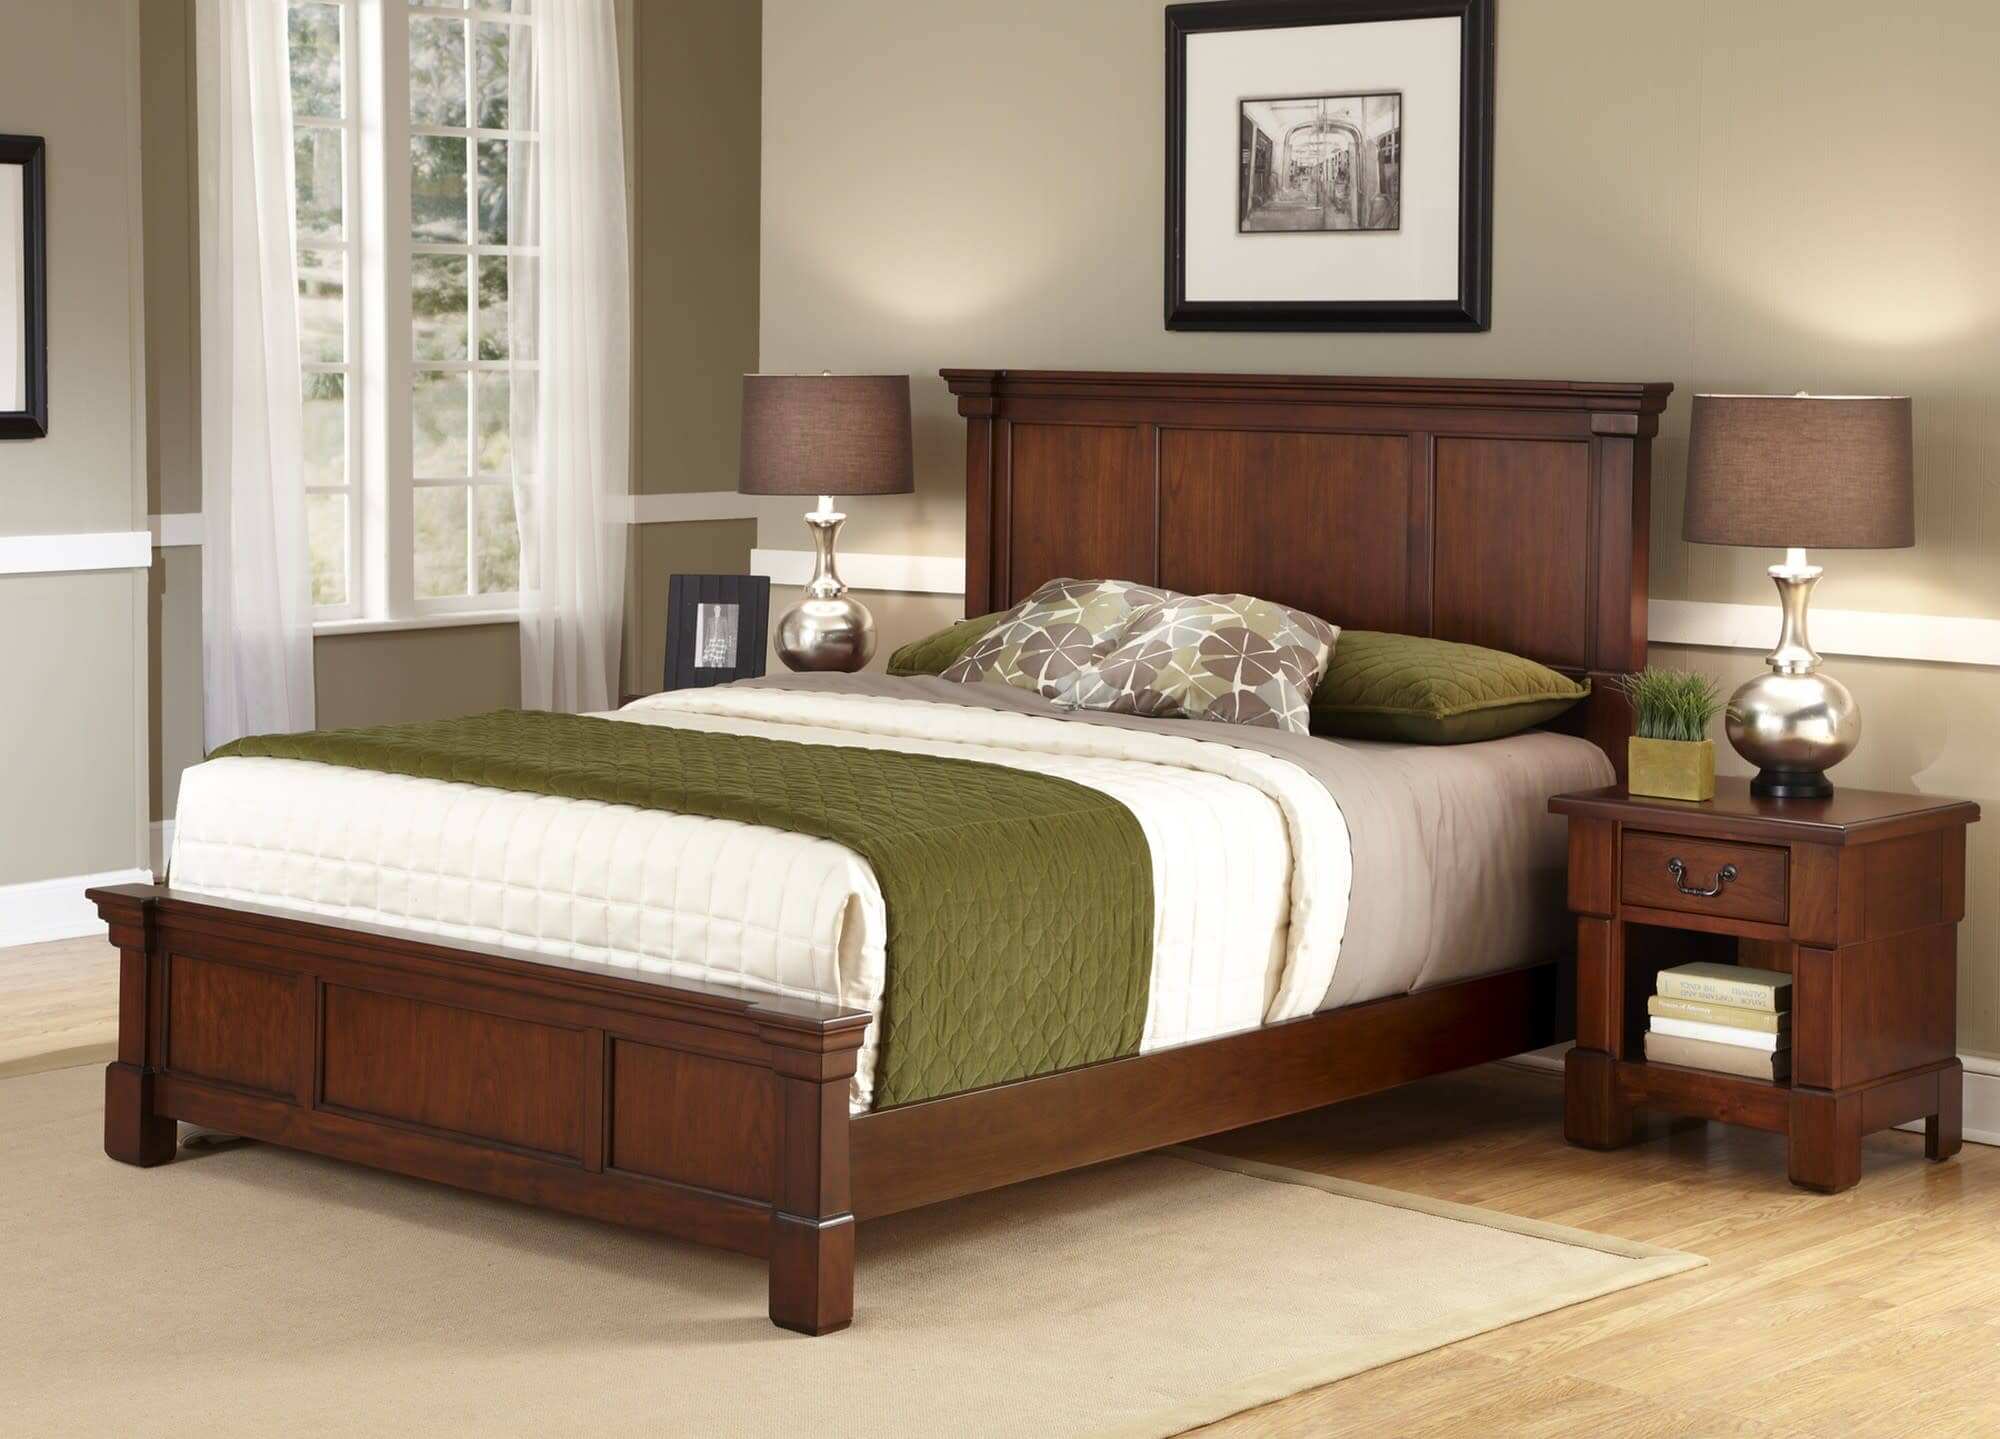 Traditional King Bed and Nightstand By Aspen King Bed Set Aspen